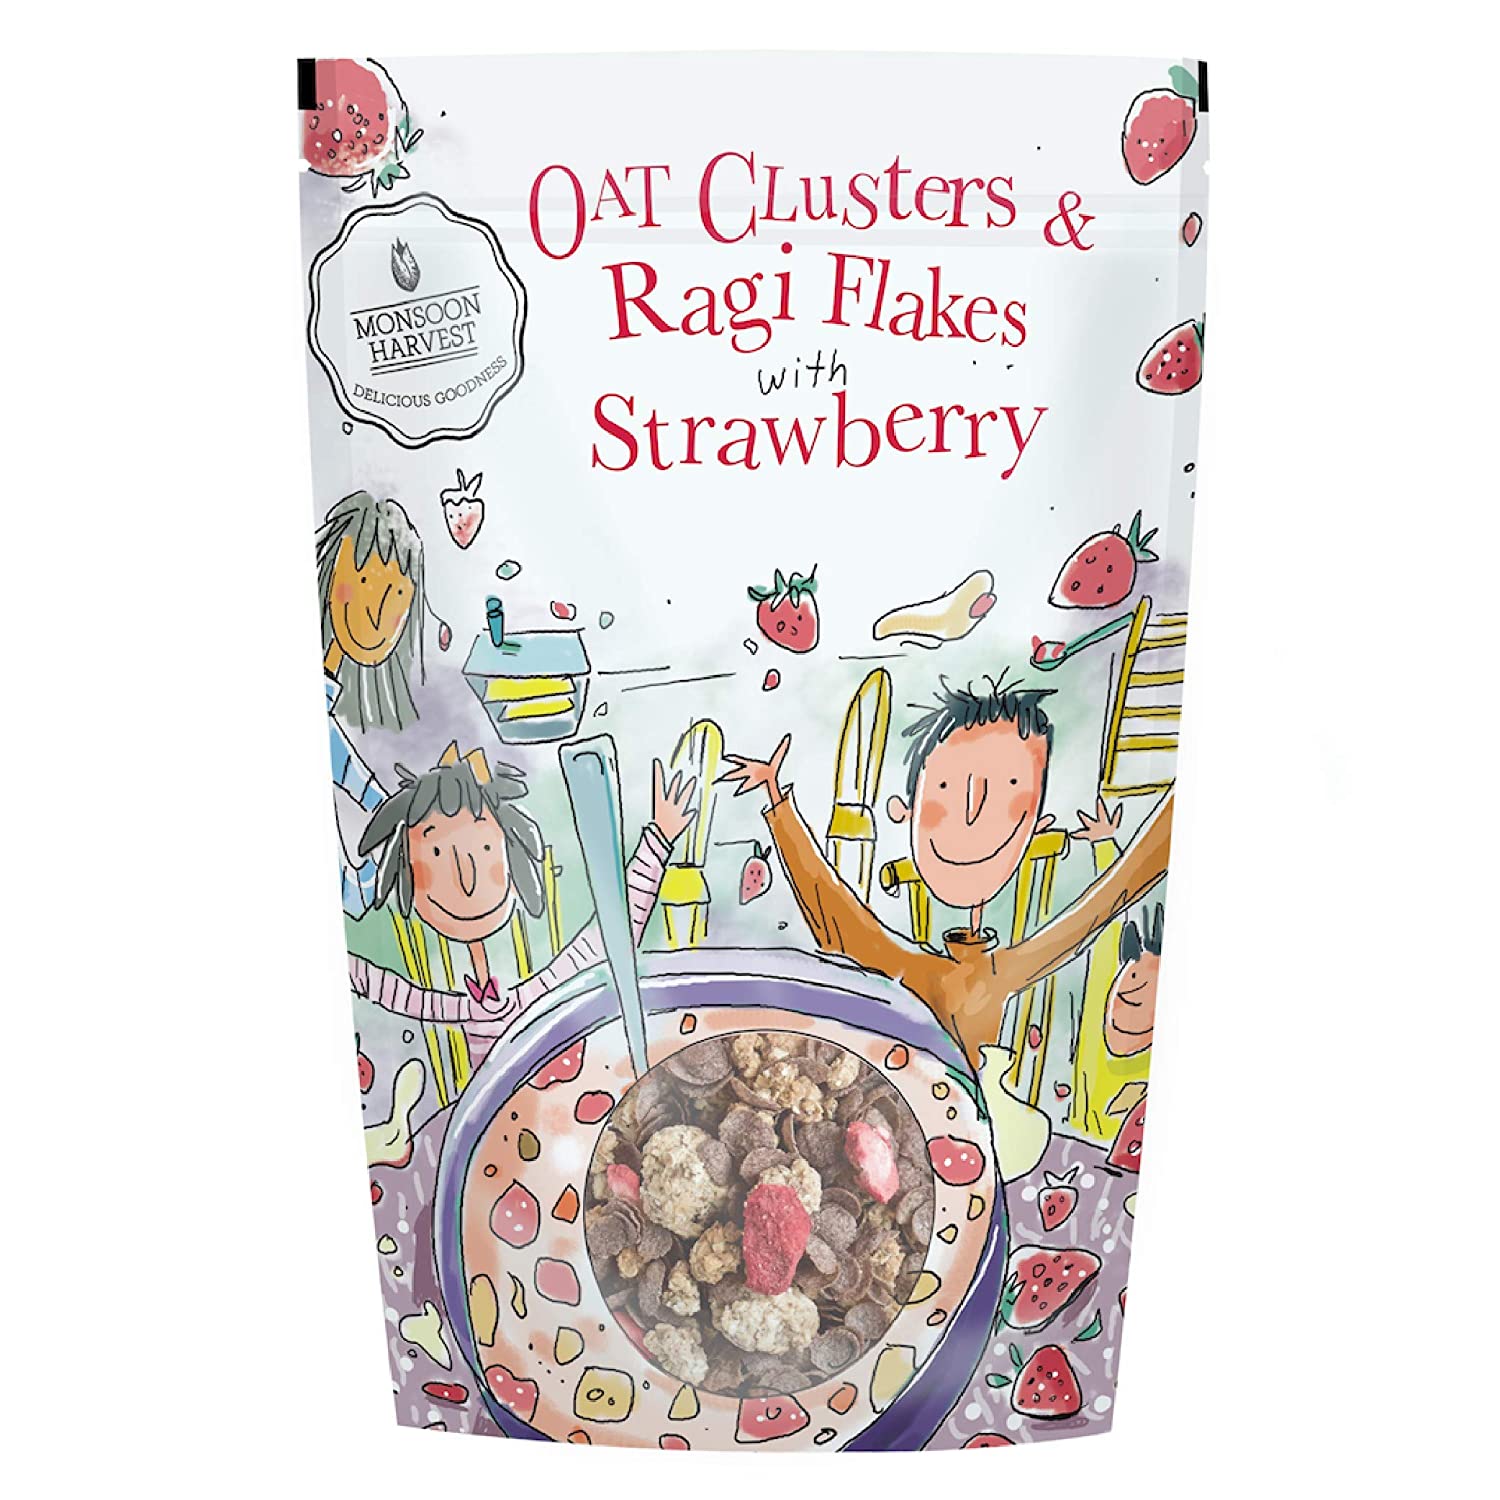 Monsoon Harvest Breakfast Cereal - Oat Clusters & Ragi Flakes With Strawberry Image